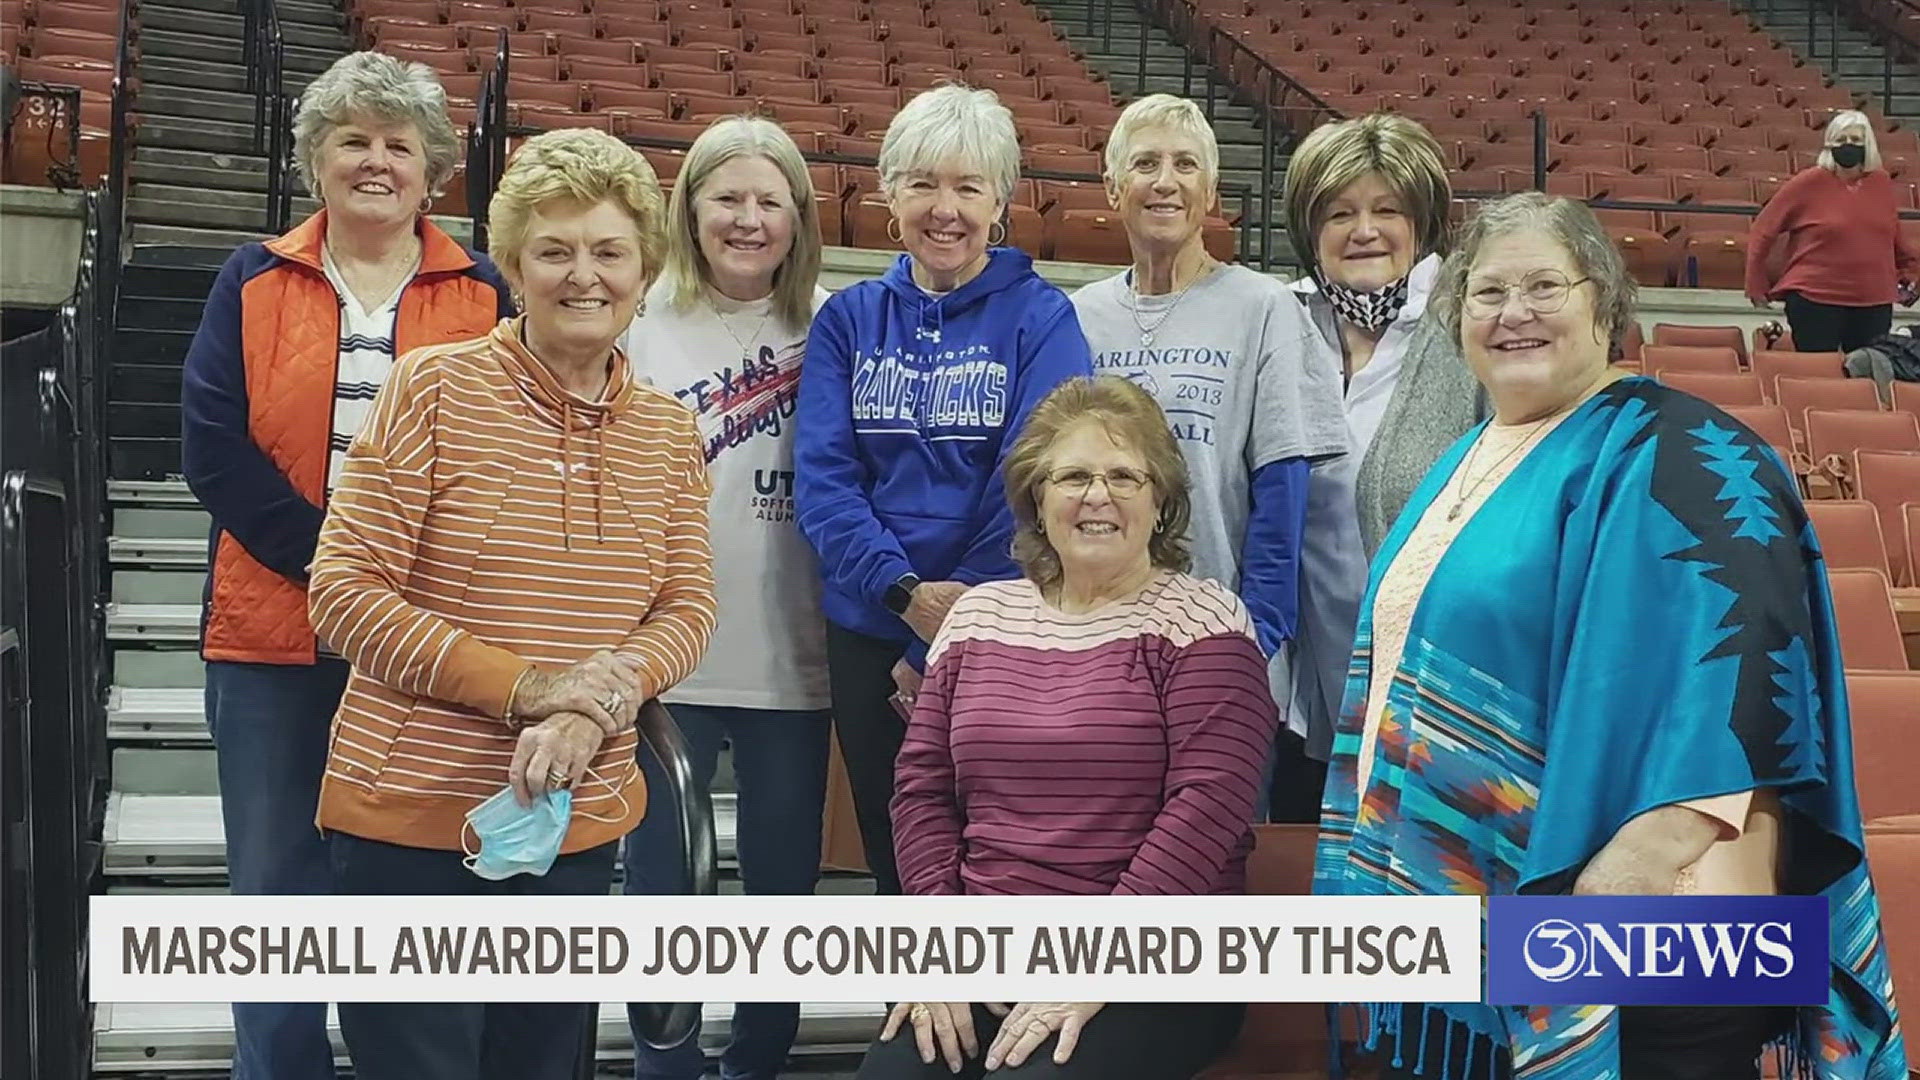 The Texas High School Coaches Association presents the award annually to a female coach dedicated to advancing girls and women's sports.